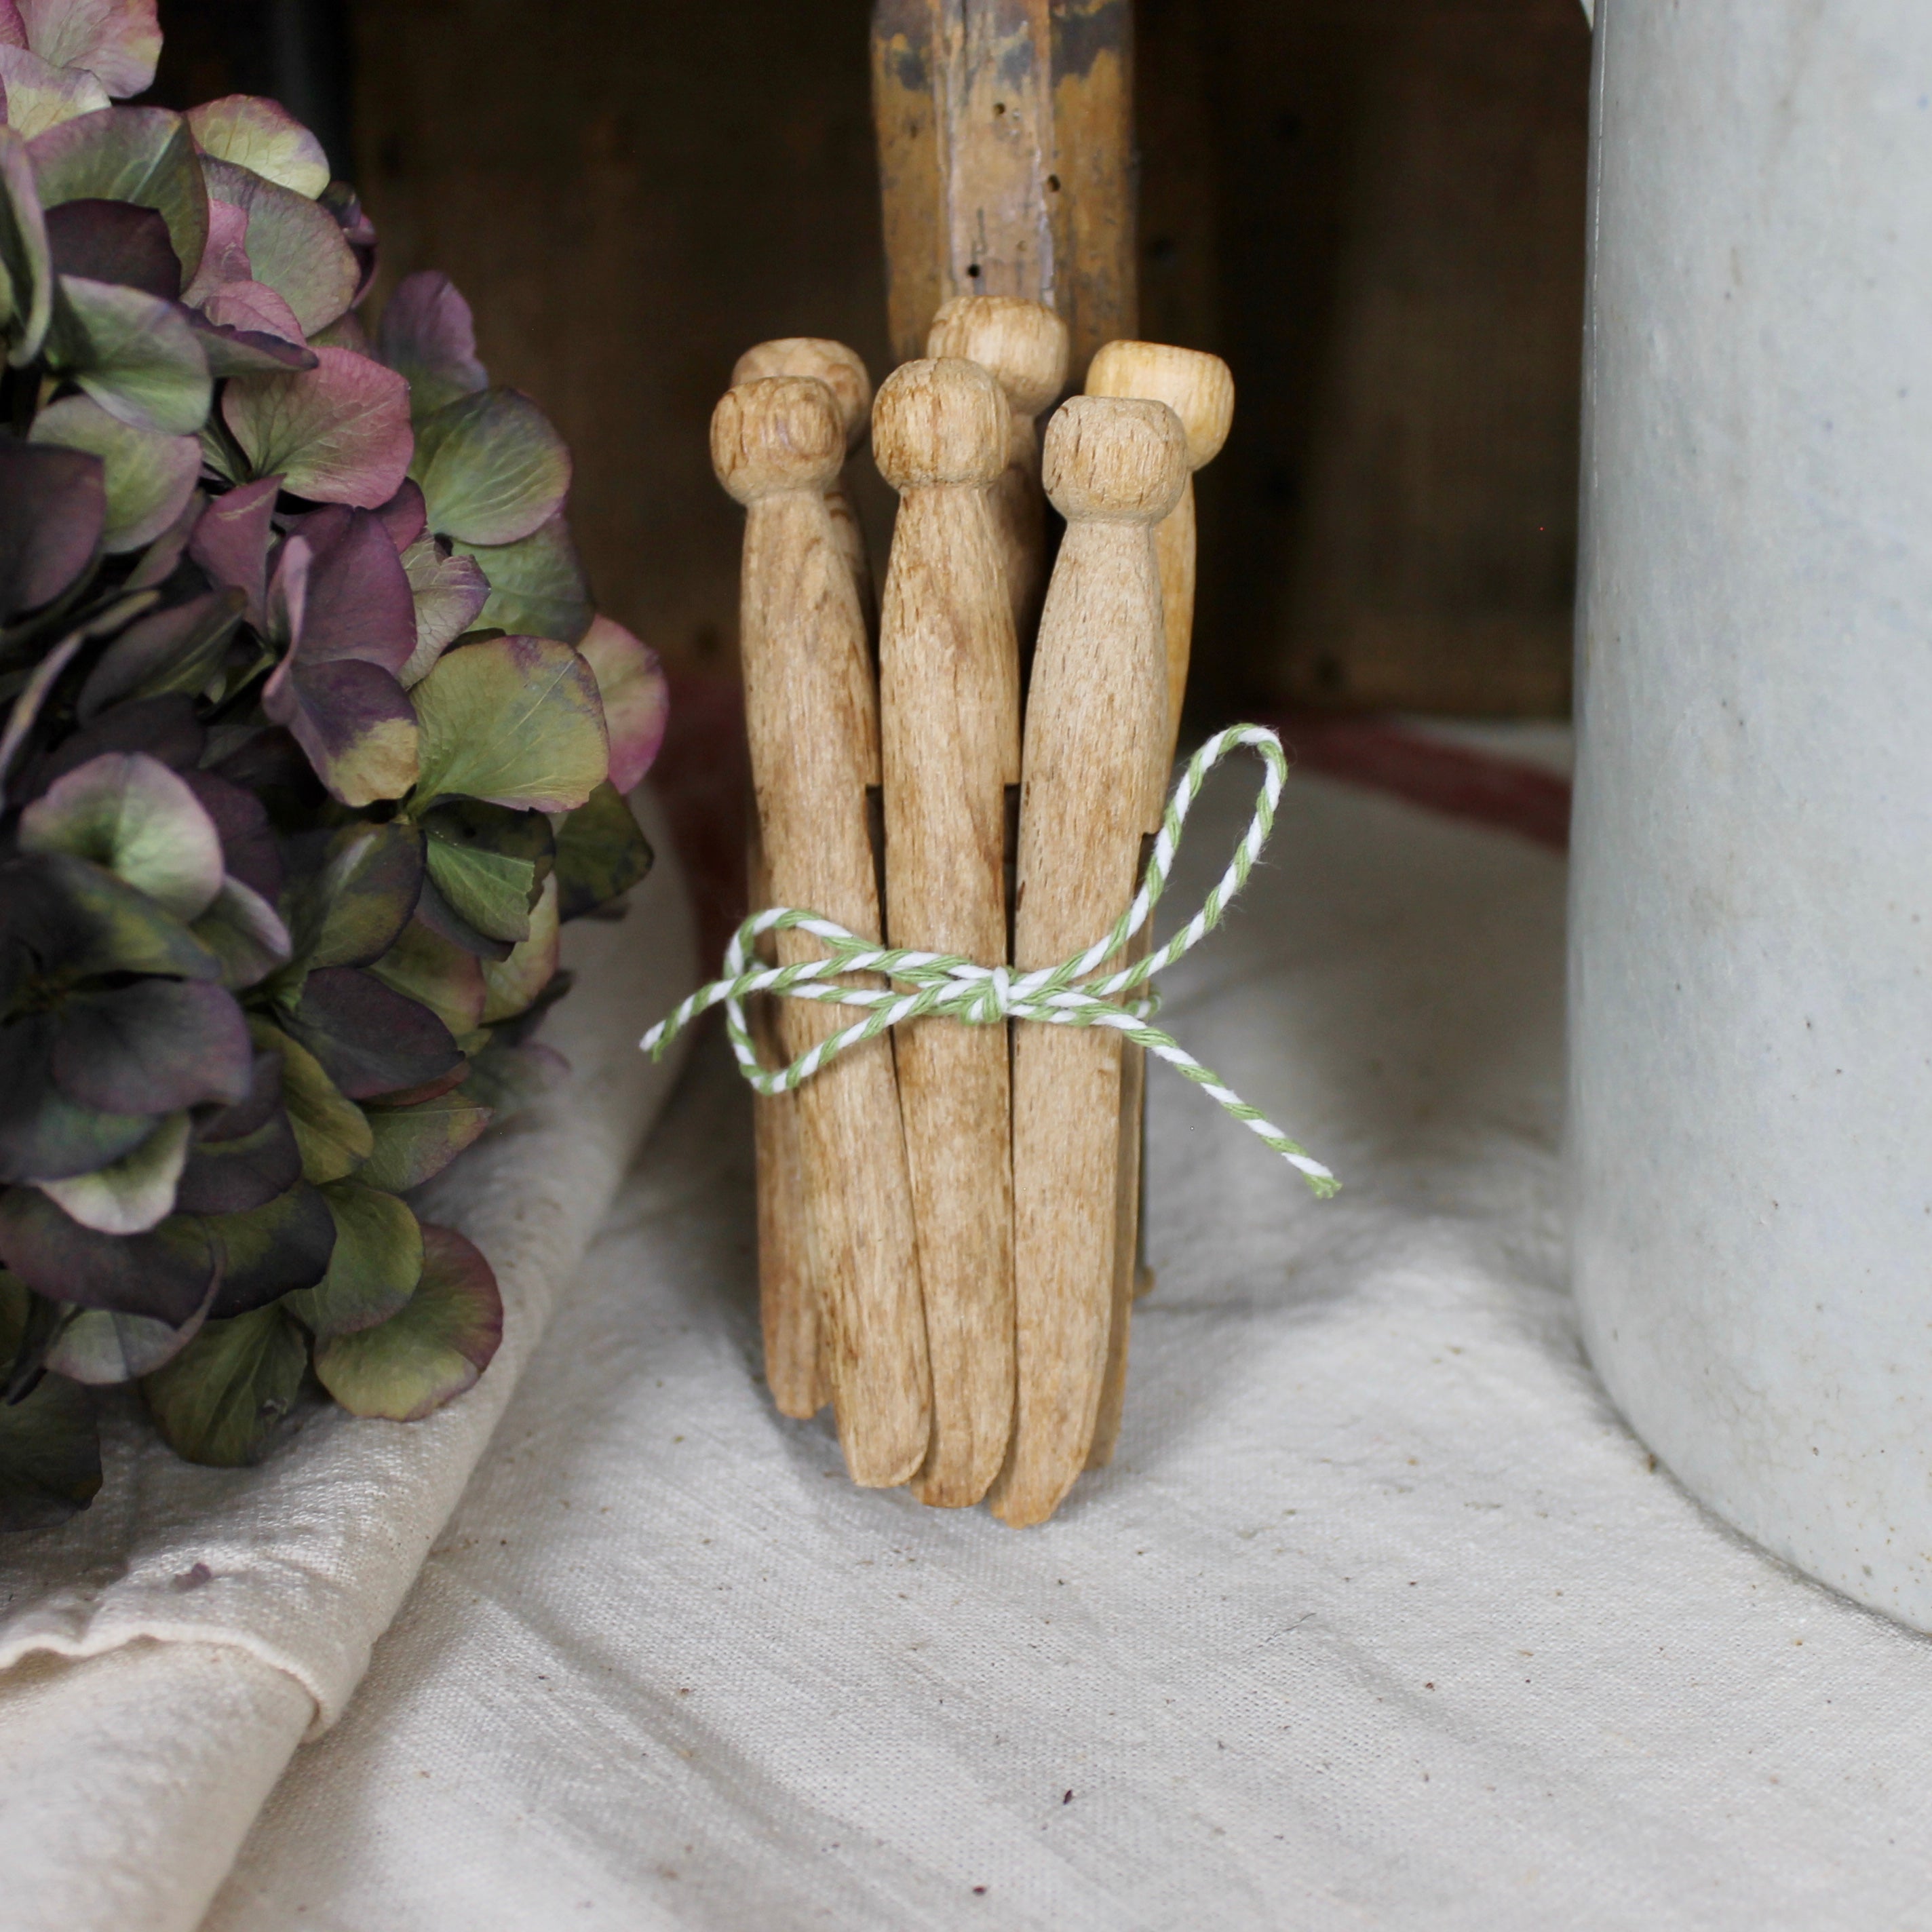 Vintage Wooden Dolly Pegs - Bundle of 6